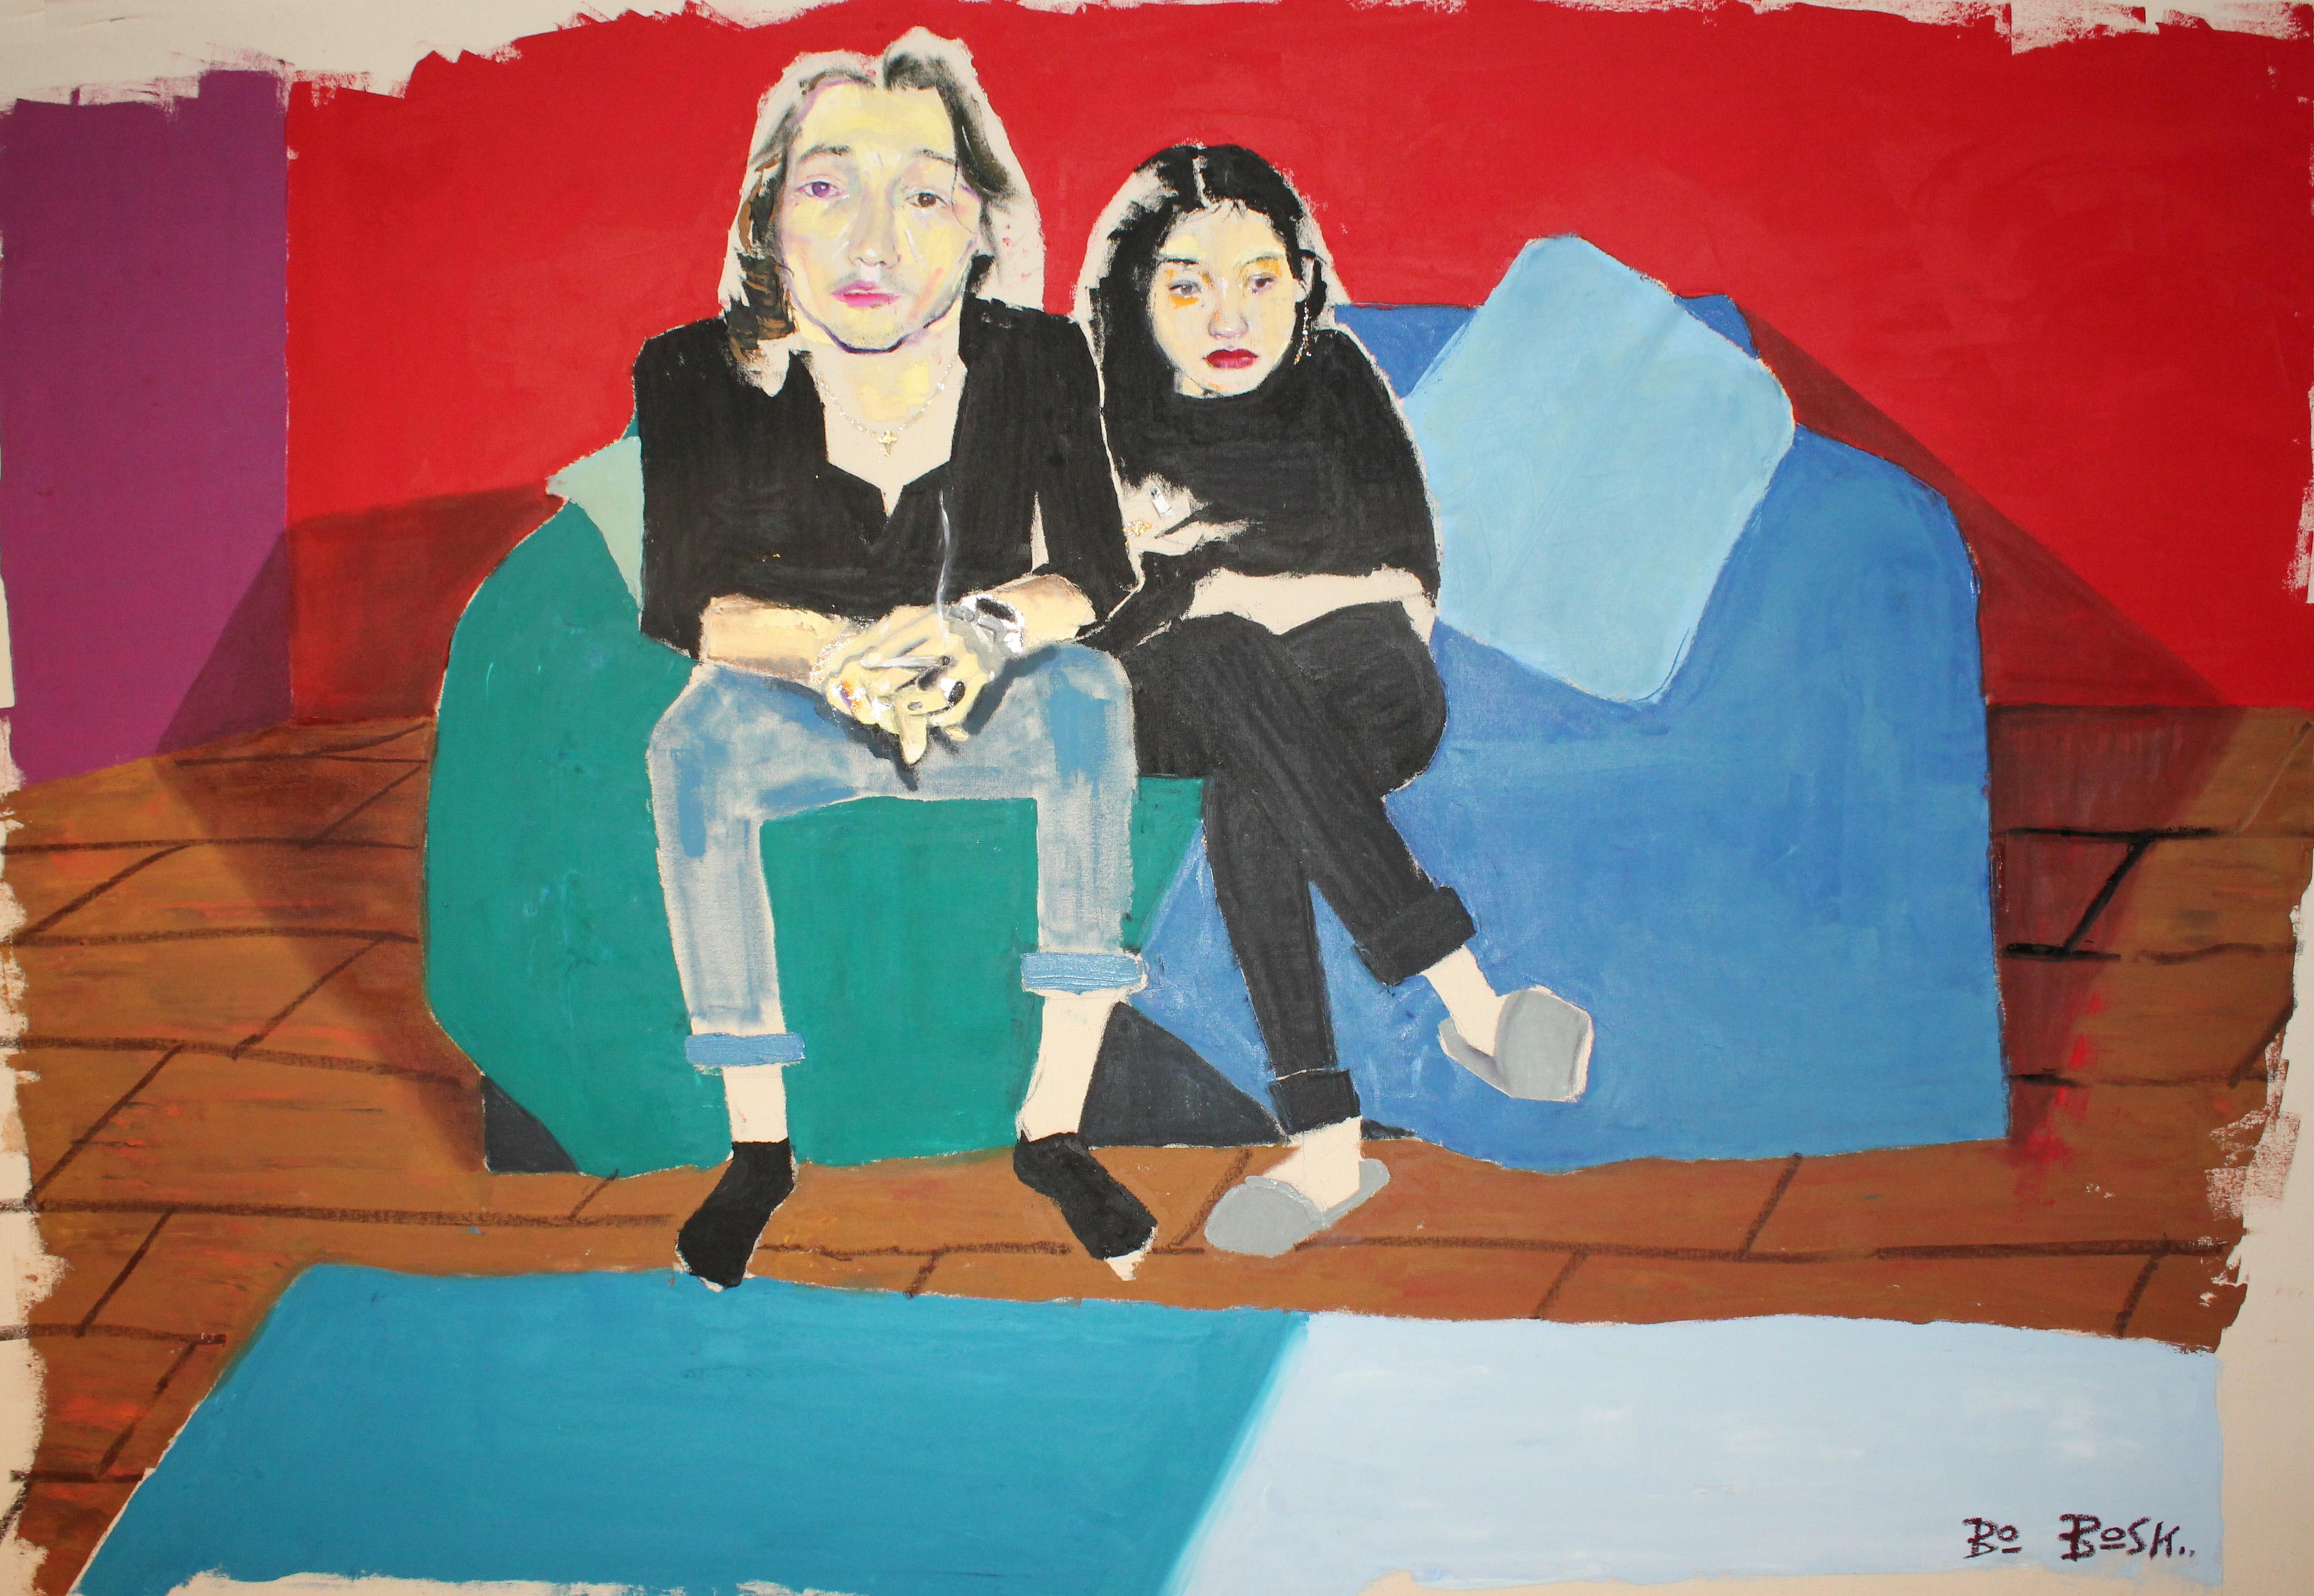 "Lloyd n Aisha" by Bo Bosk is an original oil on canvas work signed by the artist on the front. The unique figurative painting measures 43" H x 60" W. The artist painted the sides, and it does not require framing. There is a wire on the back for